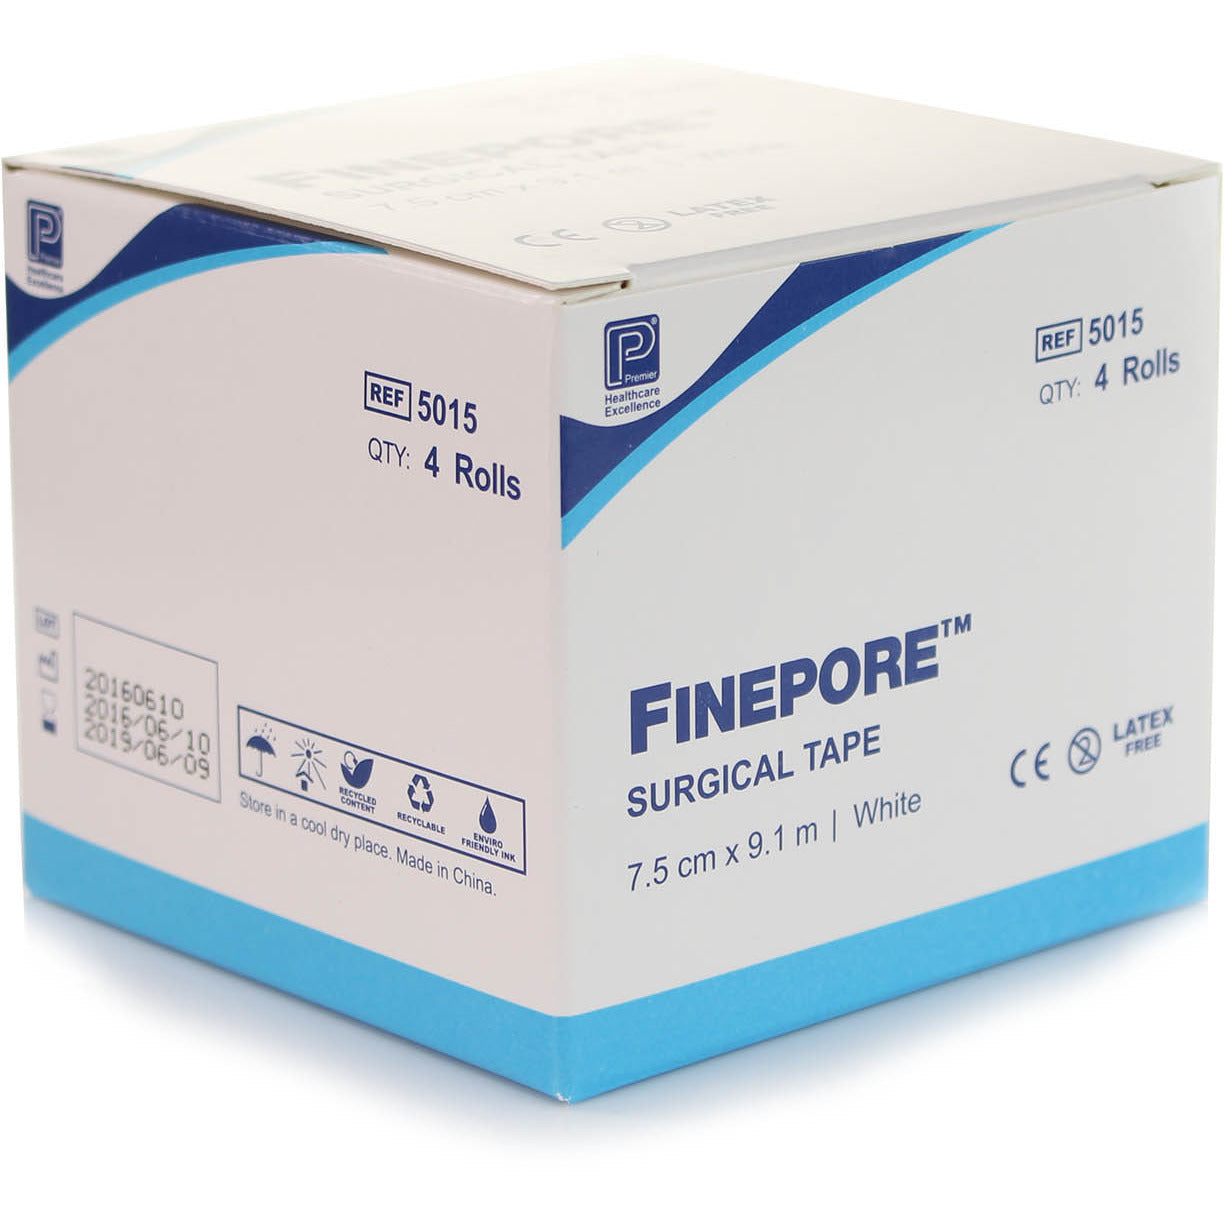 Finepore Microporous Surgical Tape - 7.5cm x 9.1m - SINGLE